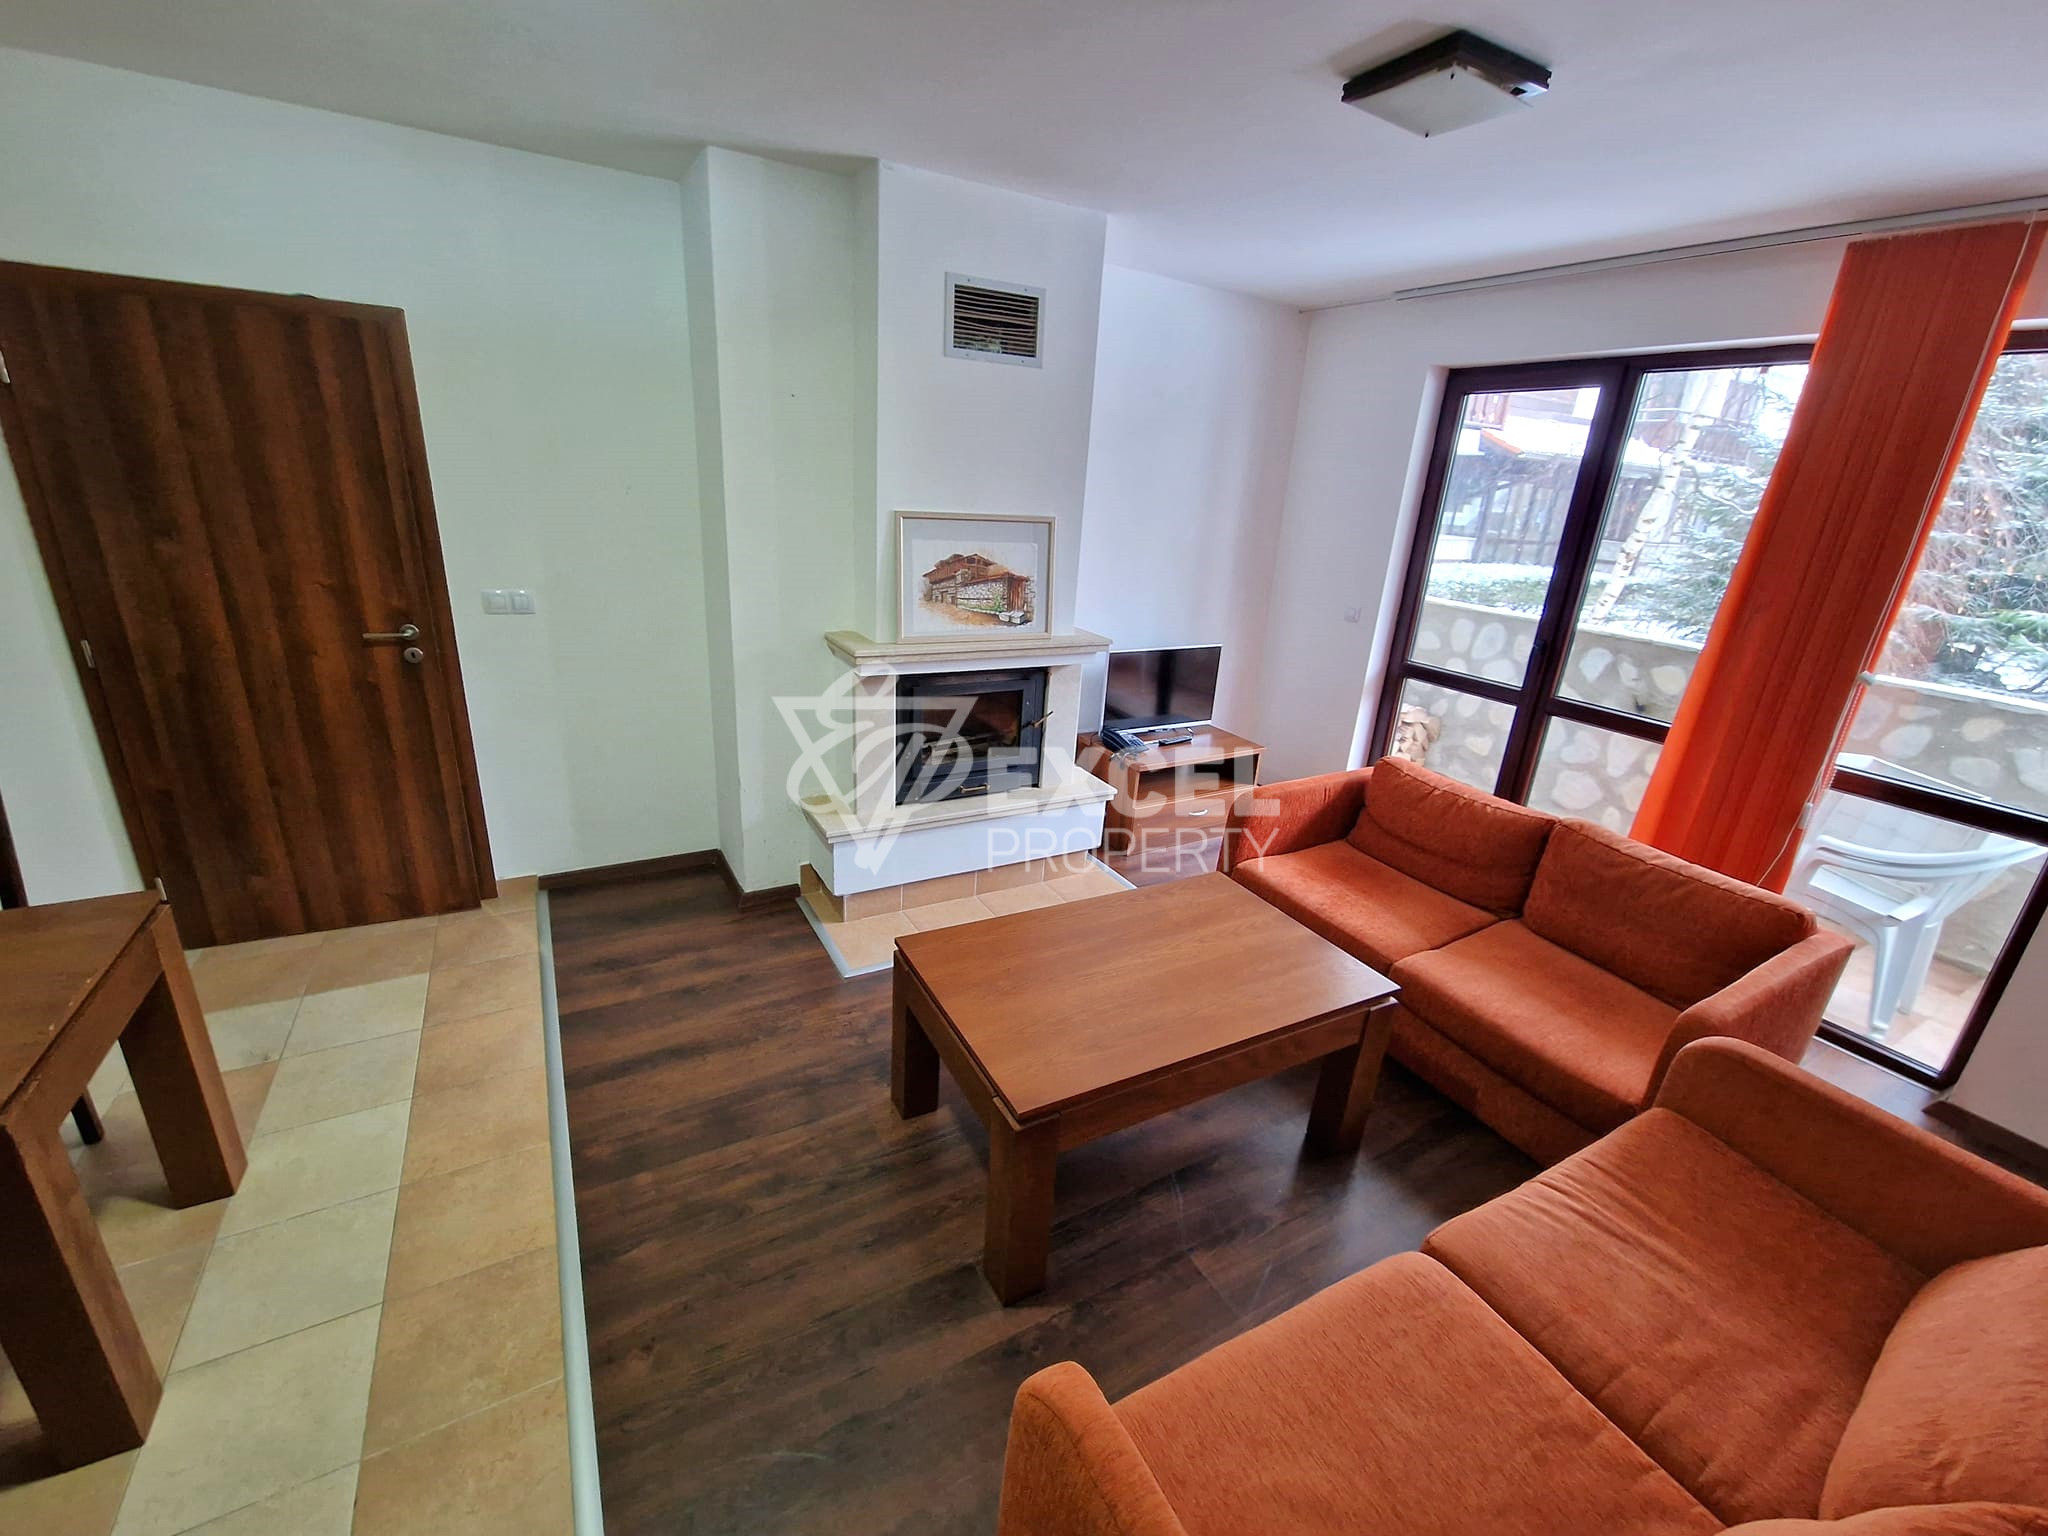 Furnished two bedroom apartment with fireplace for rent in Winslow Infinity, Bansko